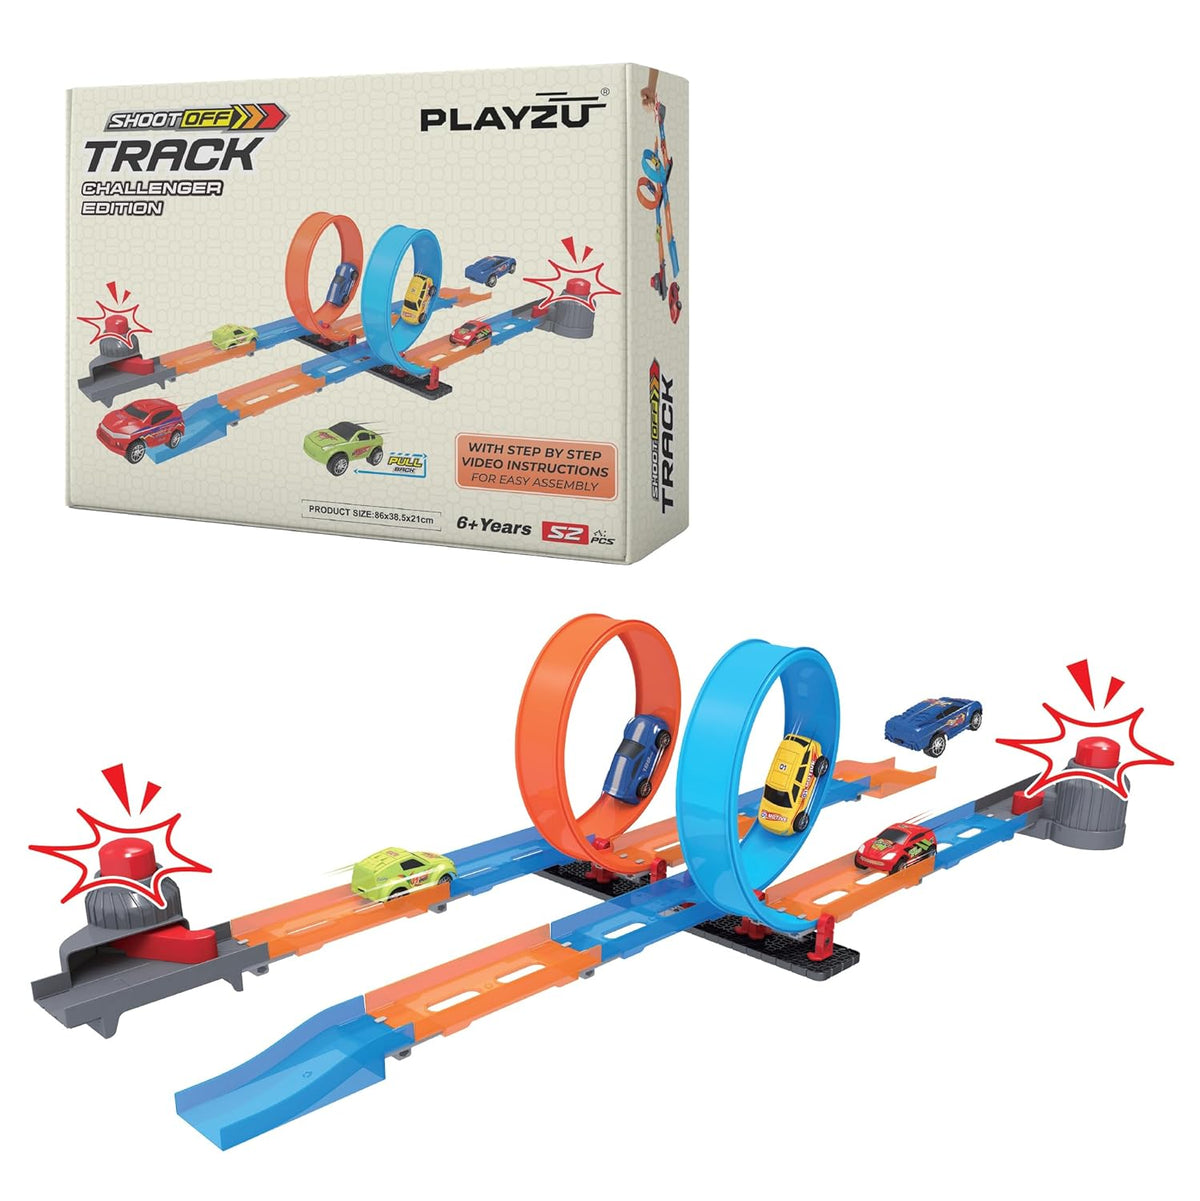 Playzu Shoot Off Challenger Edition Track Set, 52 Pcs Single Twist Loop & 2 Car Track Play Set for 2 Players Ages 6+